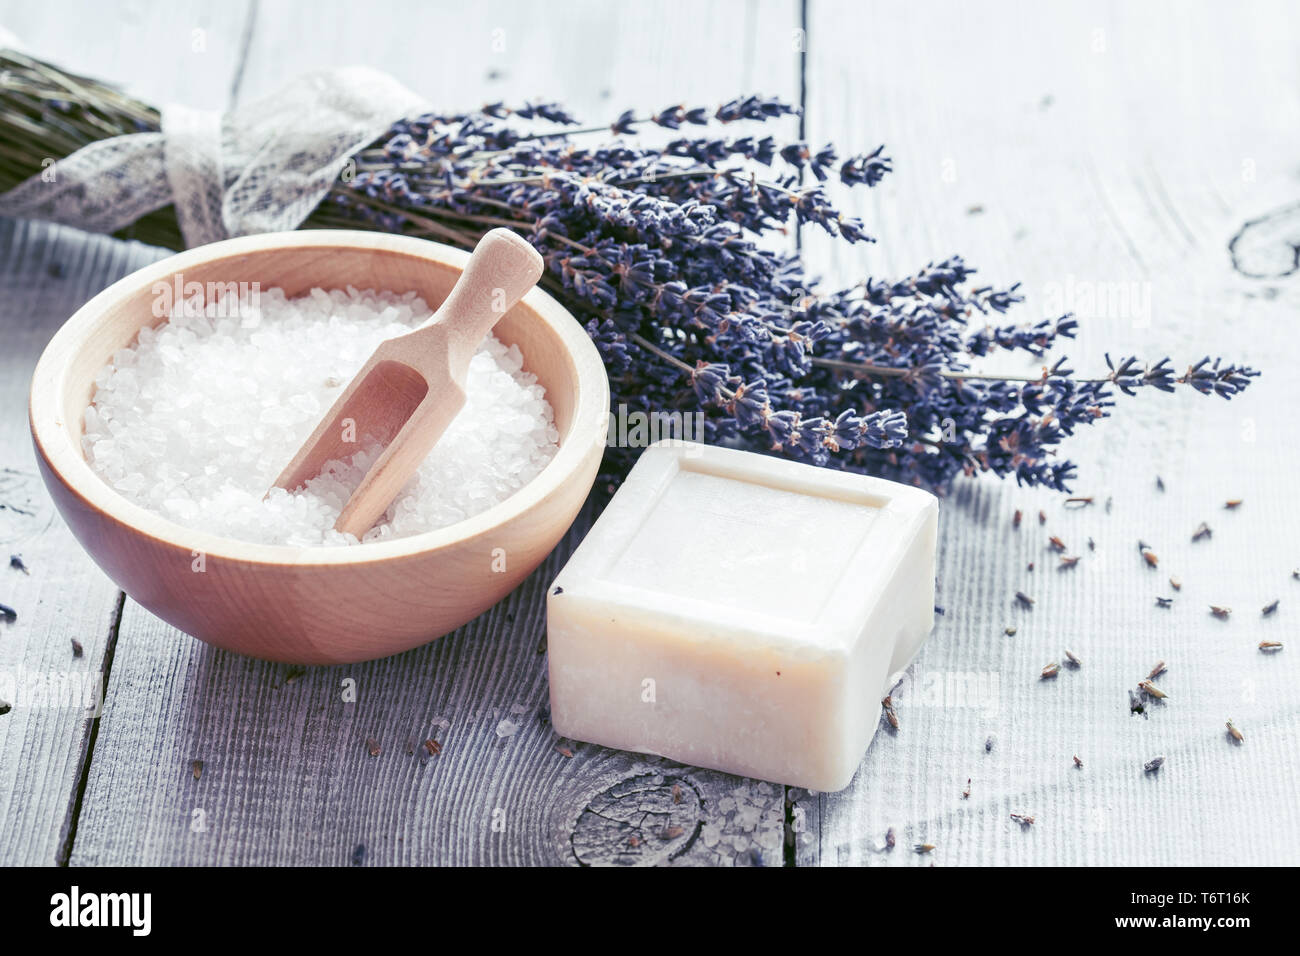 Products for bath, SPA, wellness and hygiene. Stock Photo